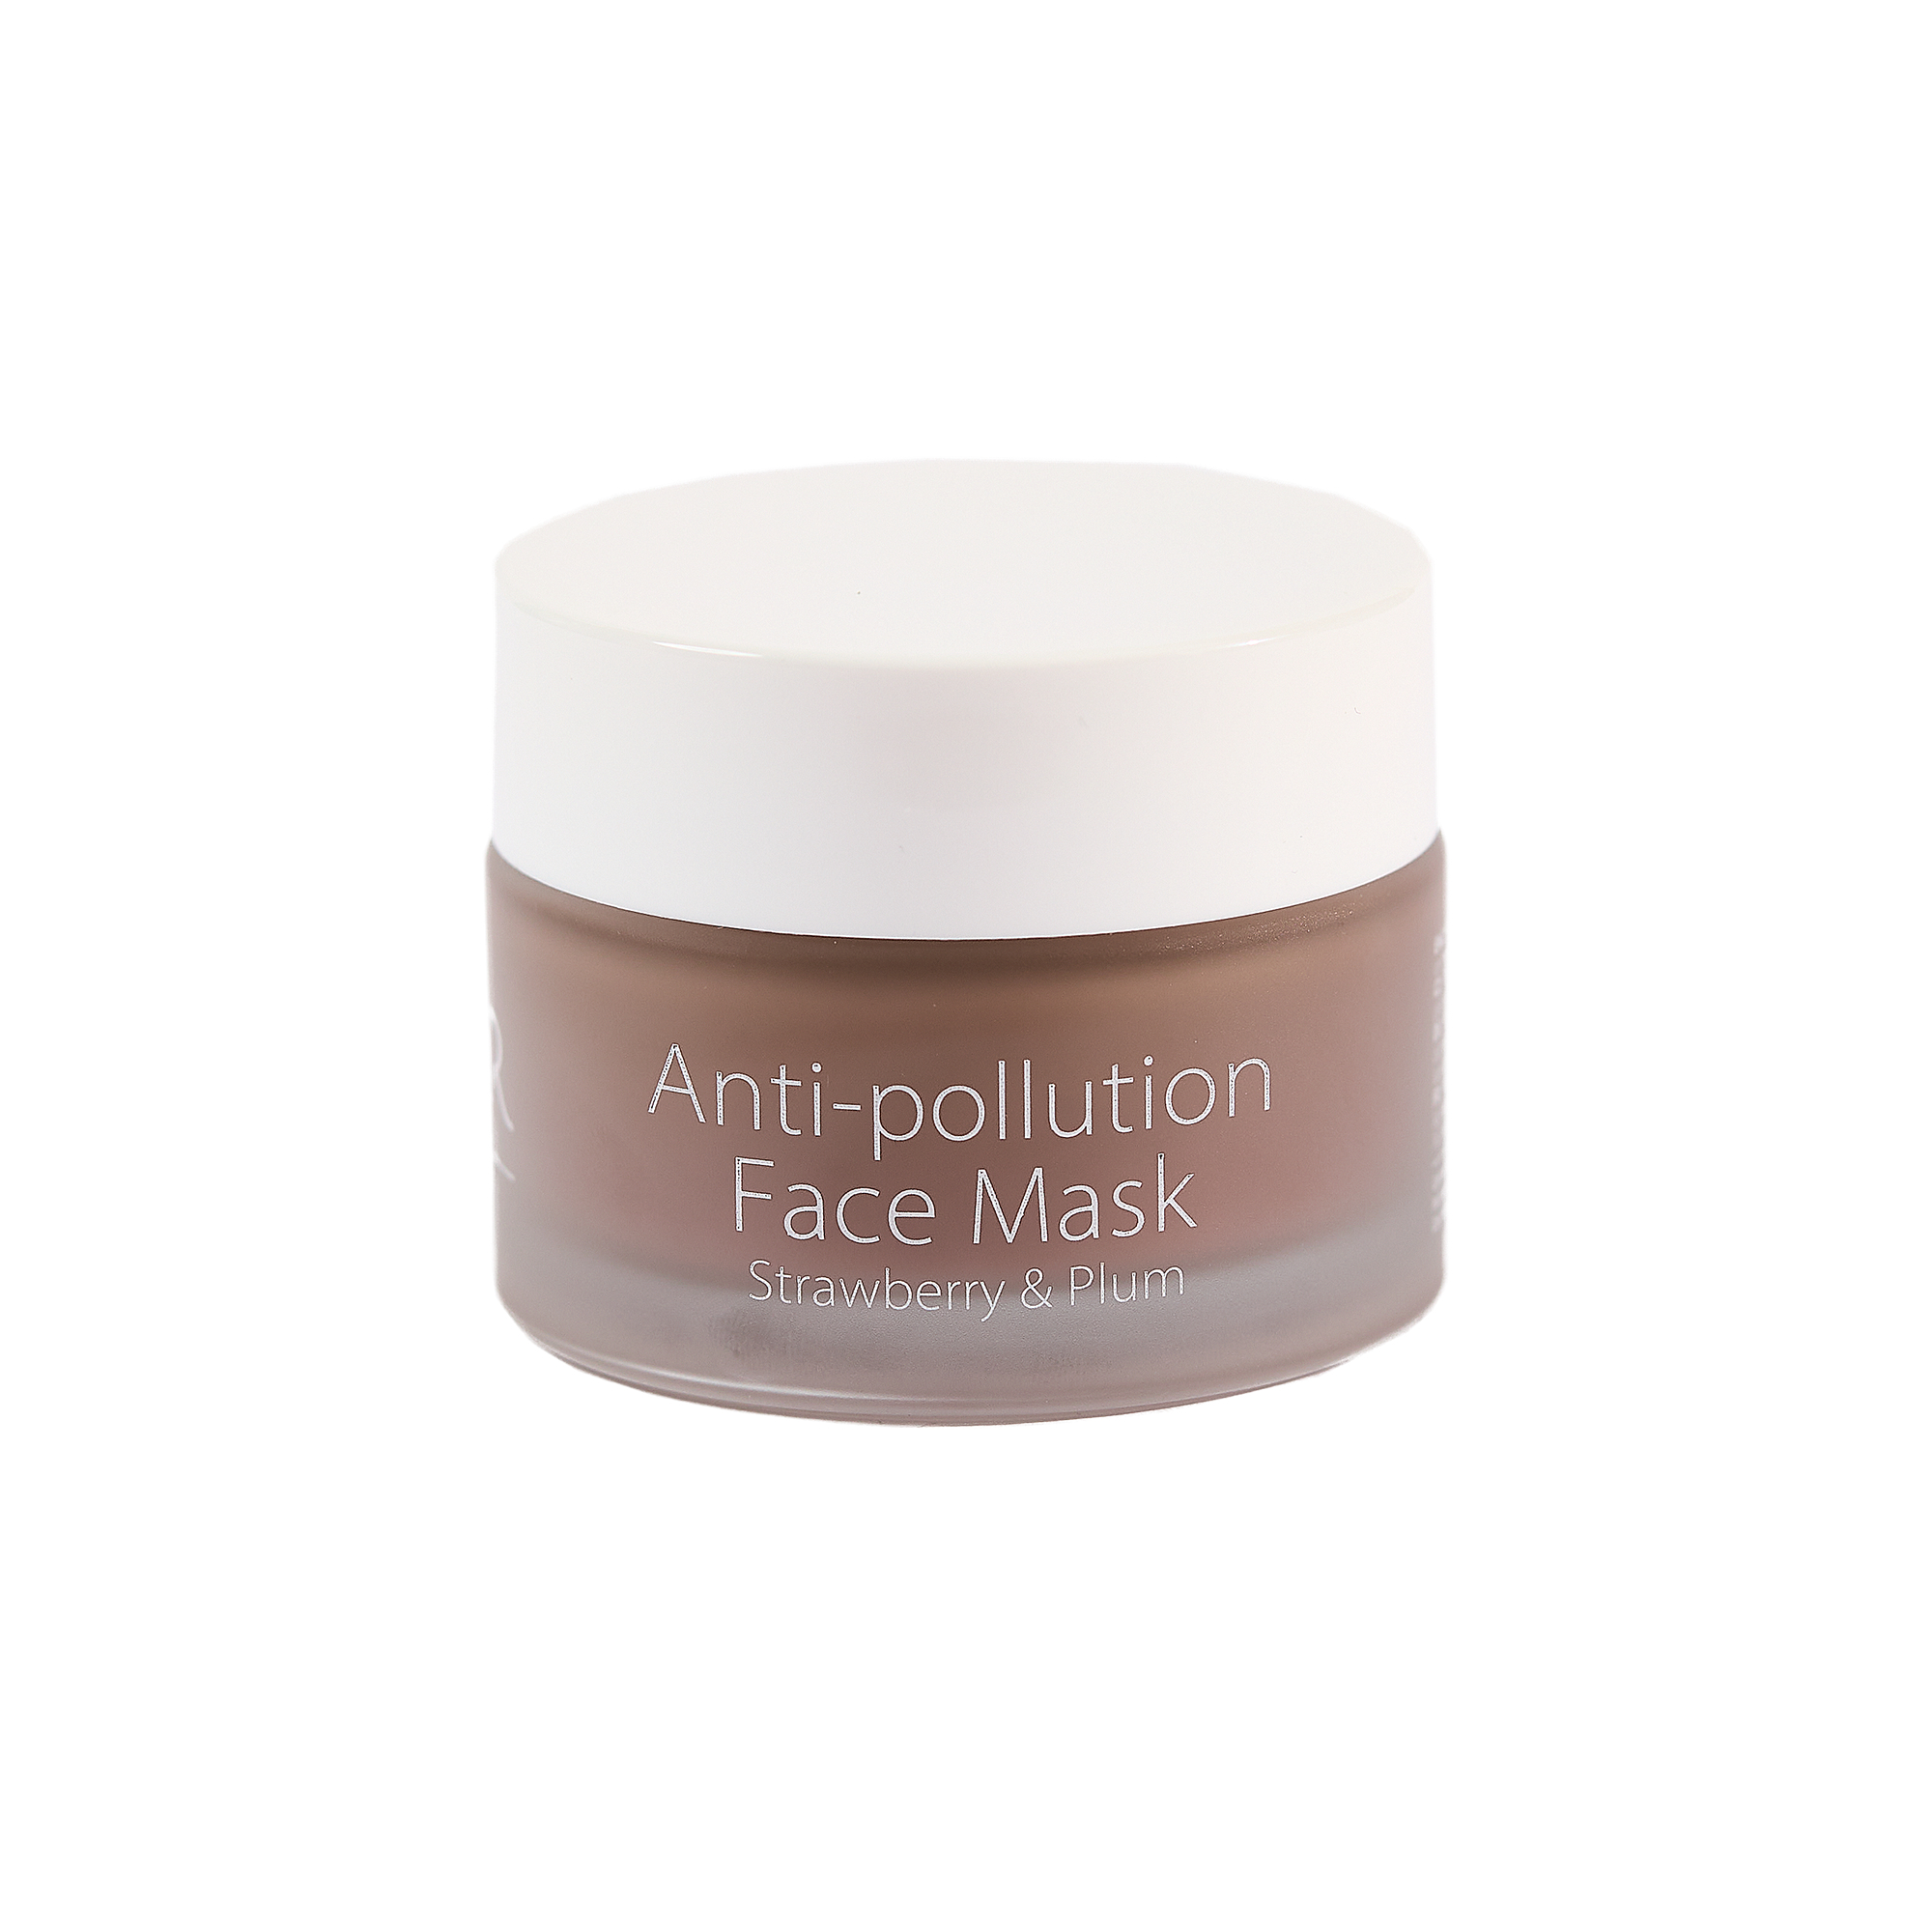 Anti-pollution Strawberry & Plum Face Mask, Cannor